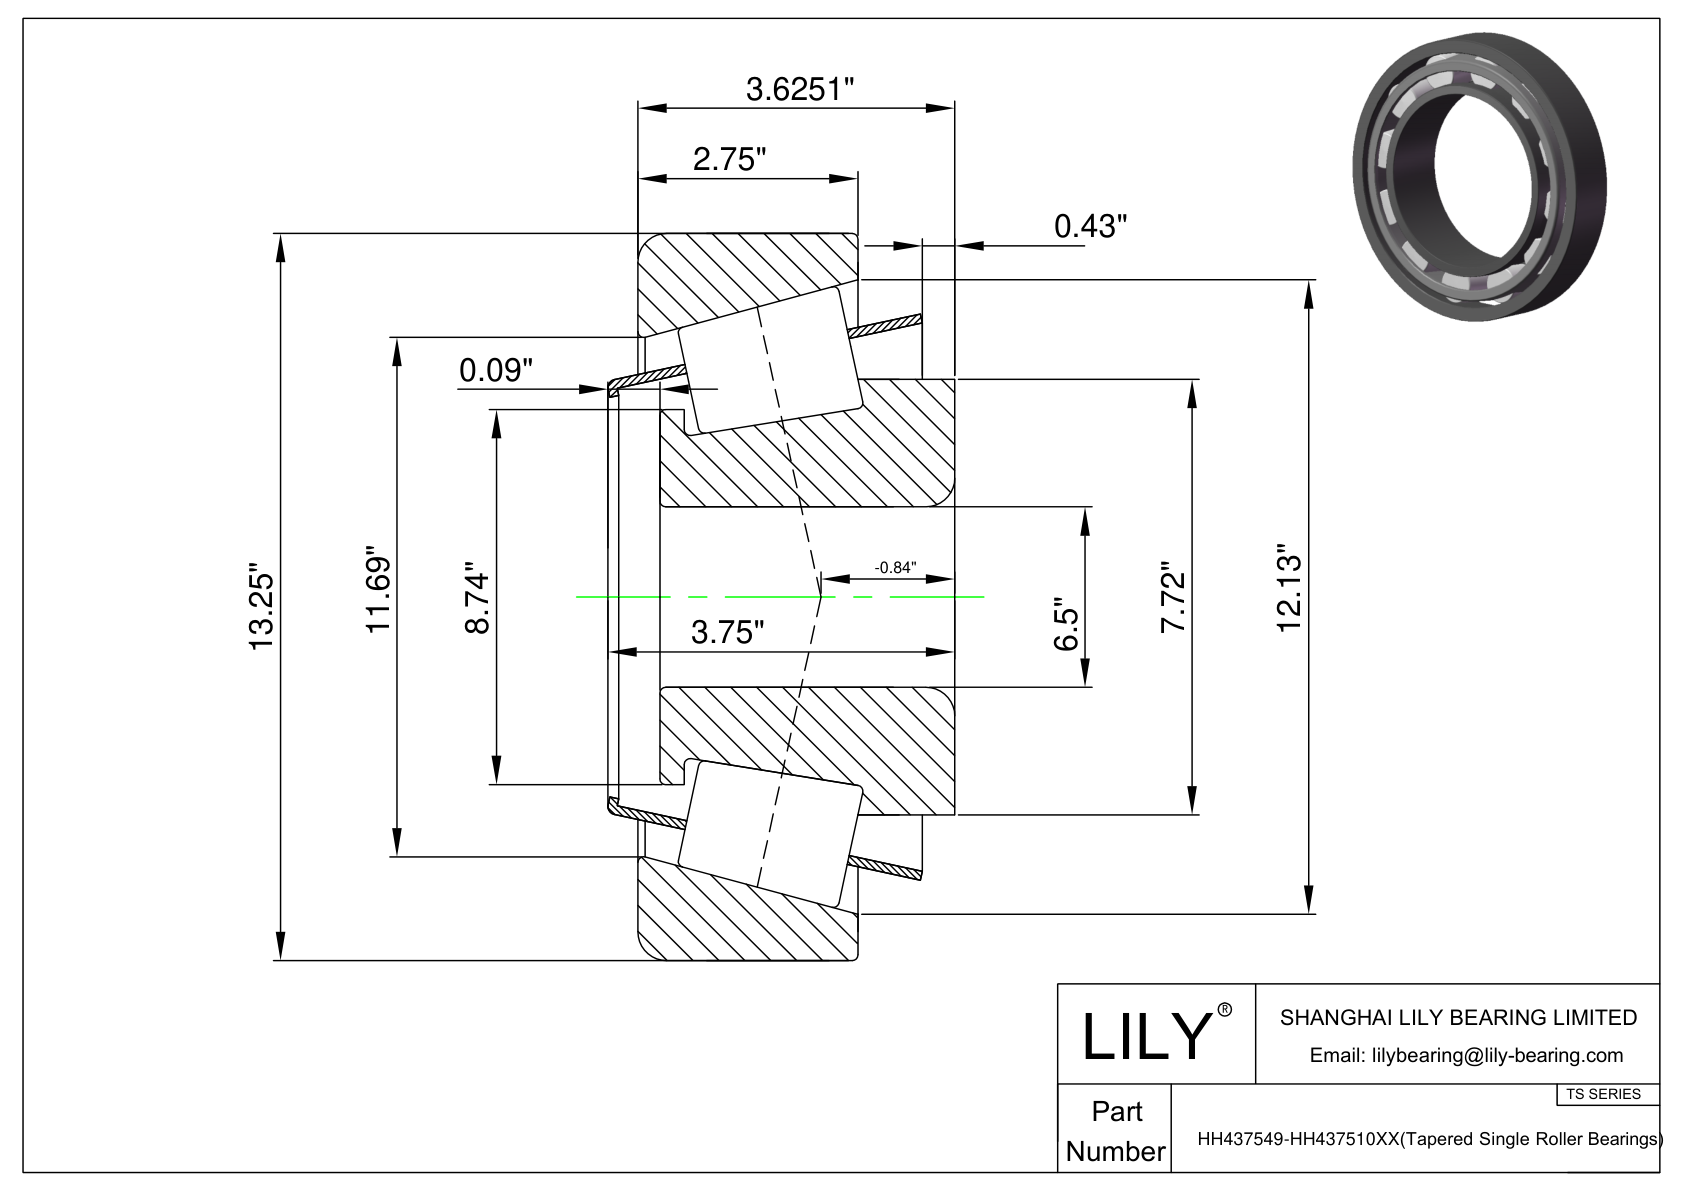 HH437549-HH437510XX TS (Tapered Single Roller Bearings) (Imperial) cad drawing